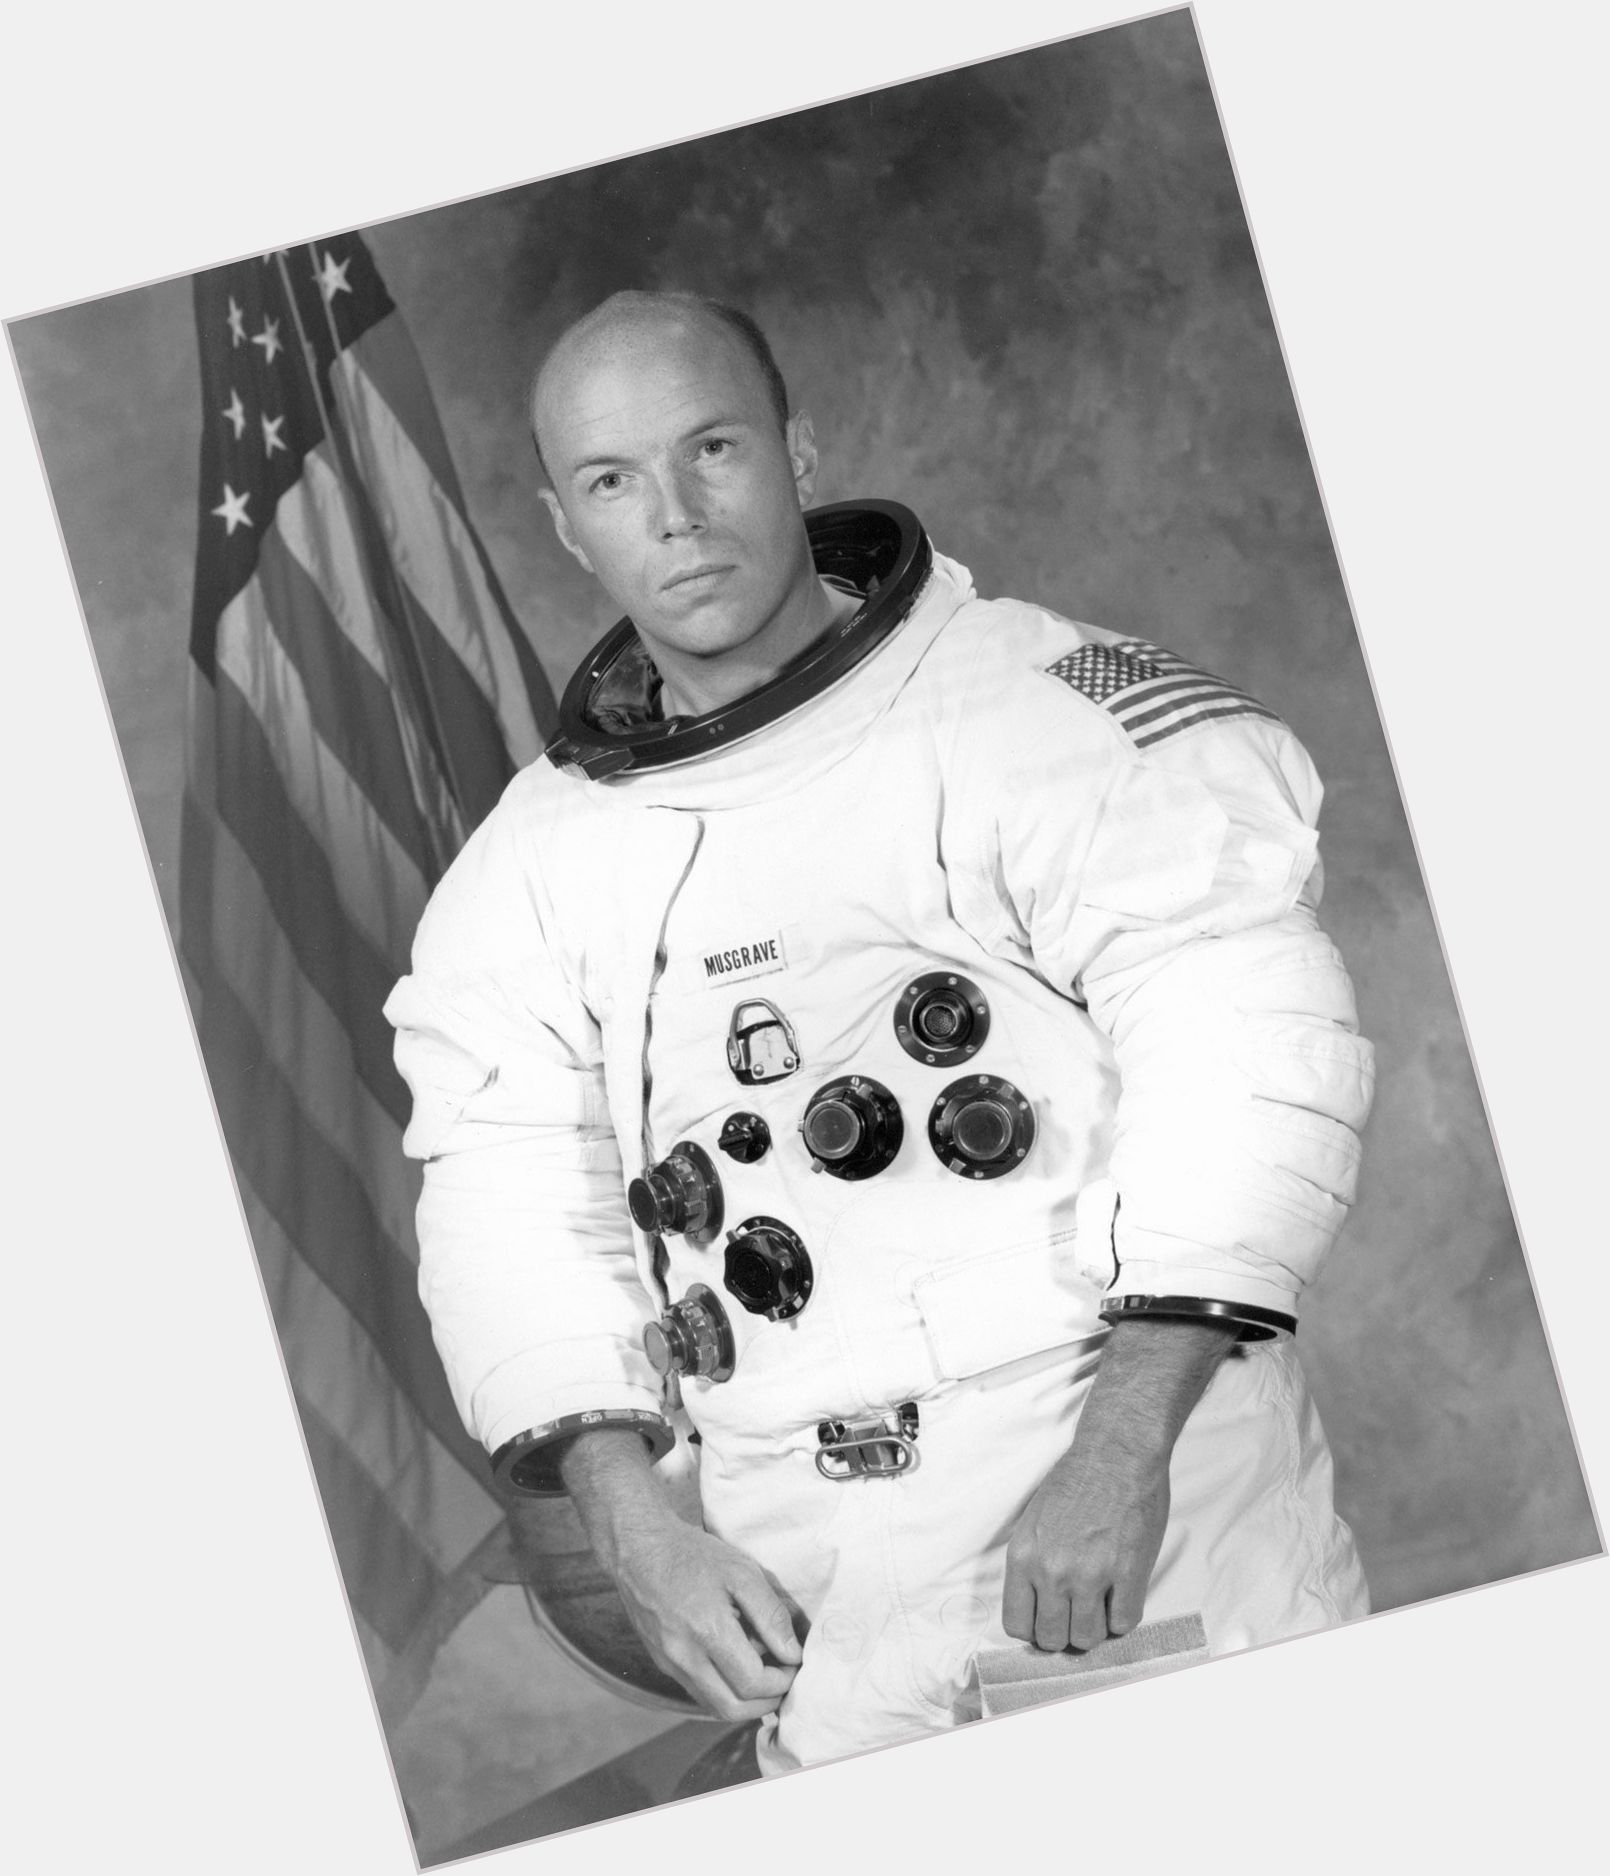 Https://fanpagepress.net/m/S/Story Musgrave New Pic 1